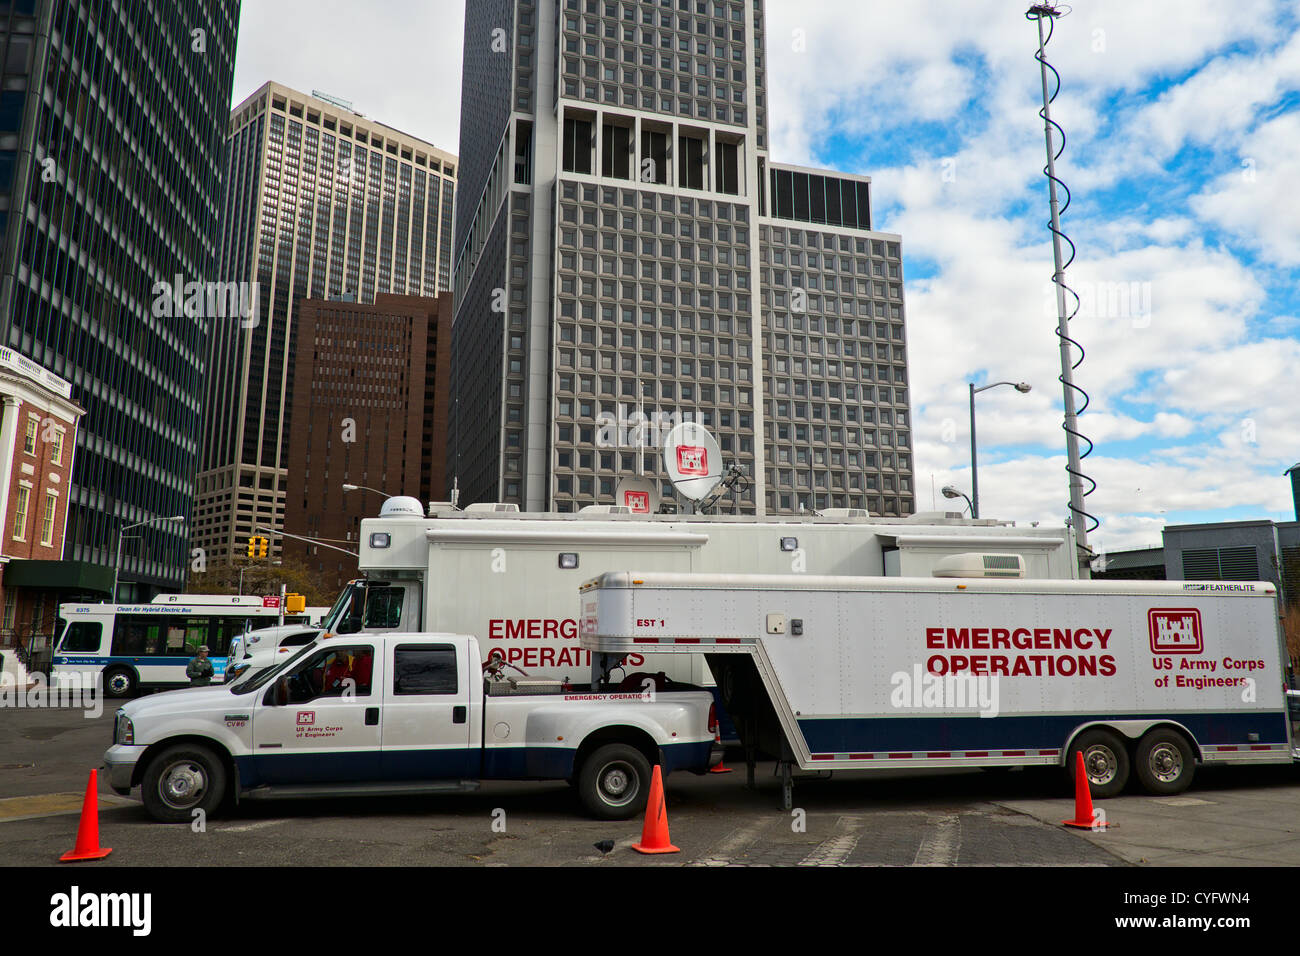 November 3, 2012, New York, NY, US.  Trucks from the U.S. Army Corps of Engineers parked next to Battery Park in lower Manhattan, five days after Hurricane Sandy flooded the city's financial district. Stock Photo